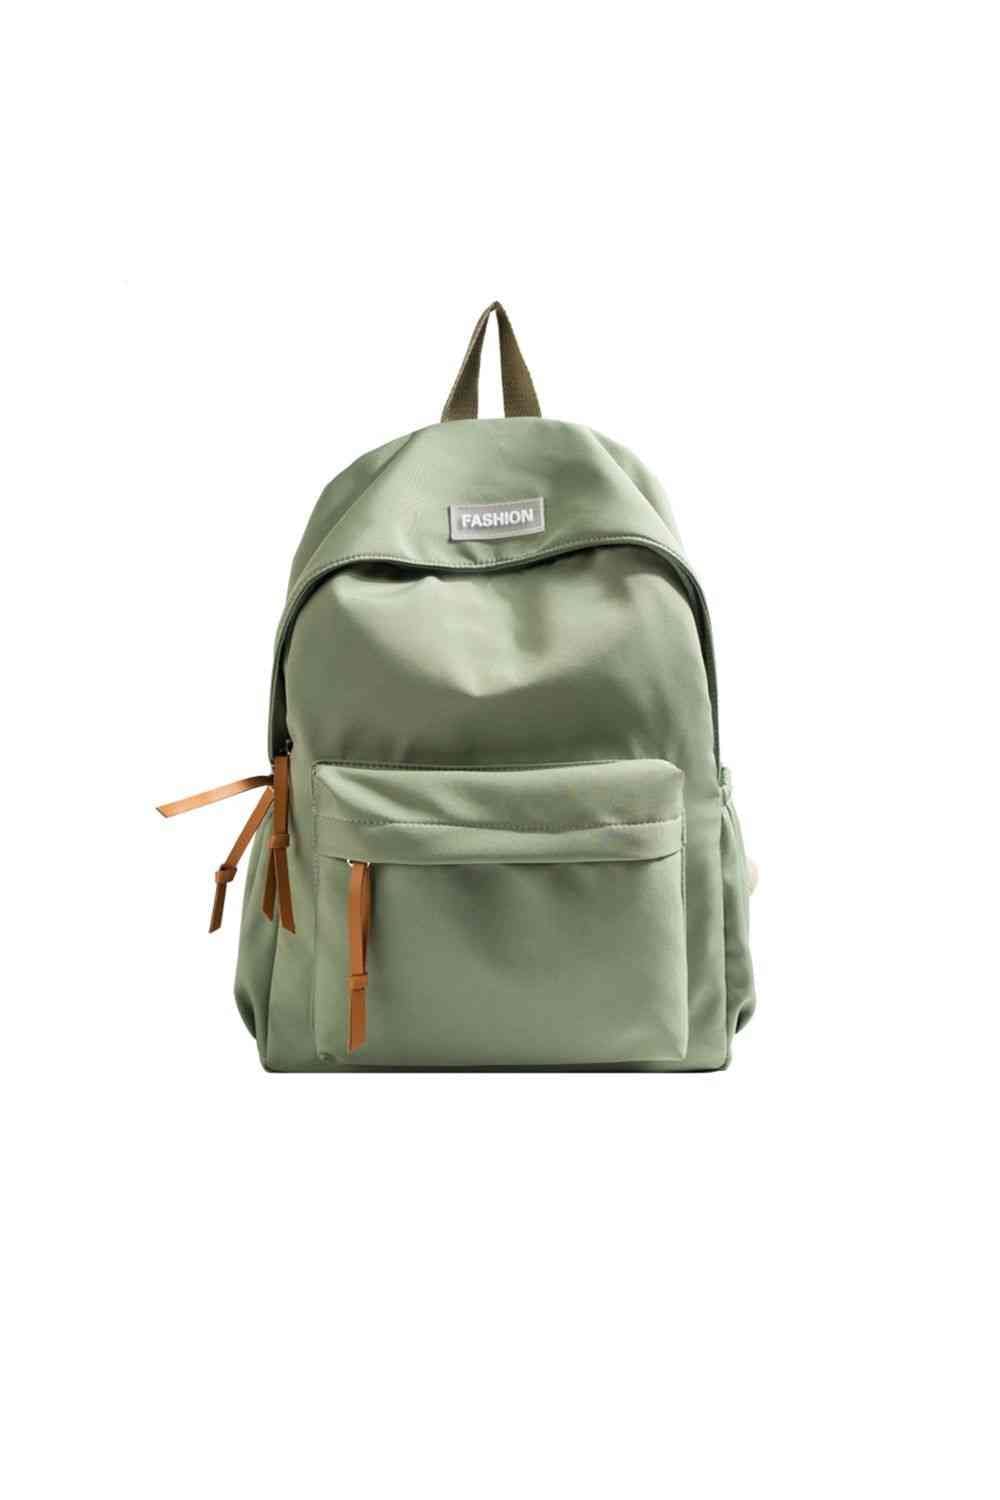 Adored Fashion Polyester Backpack Light Green / One Size